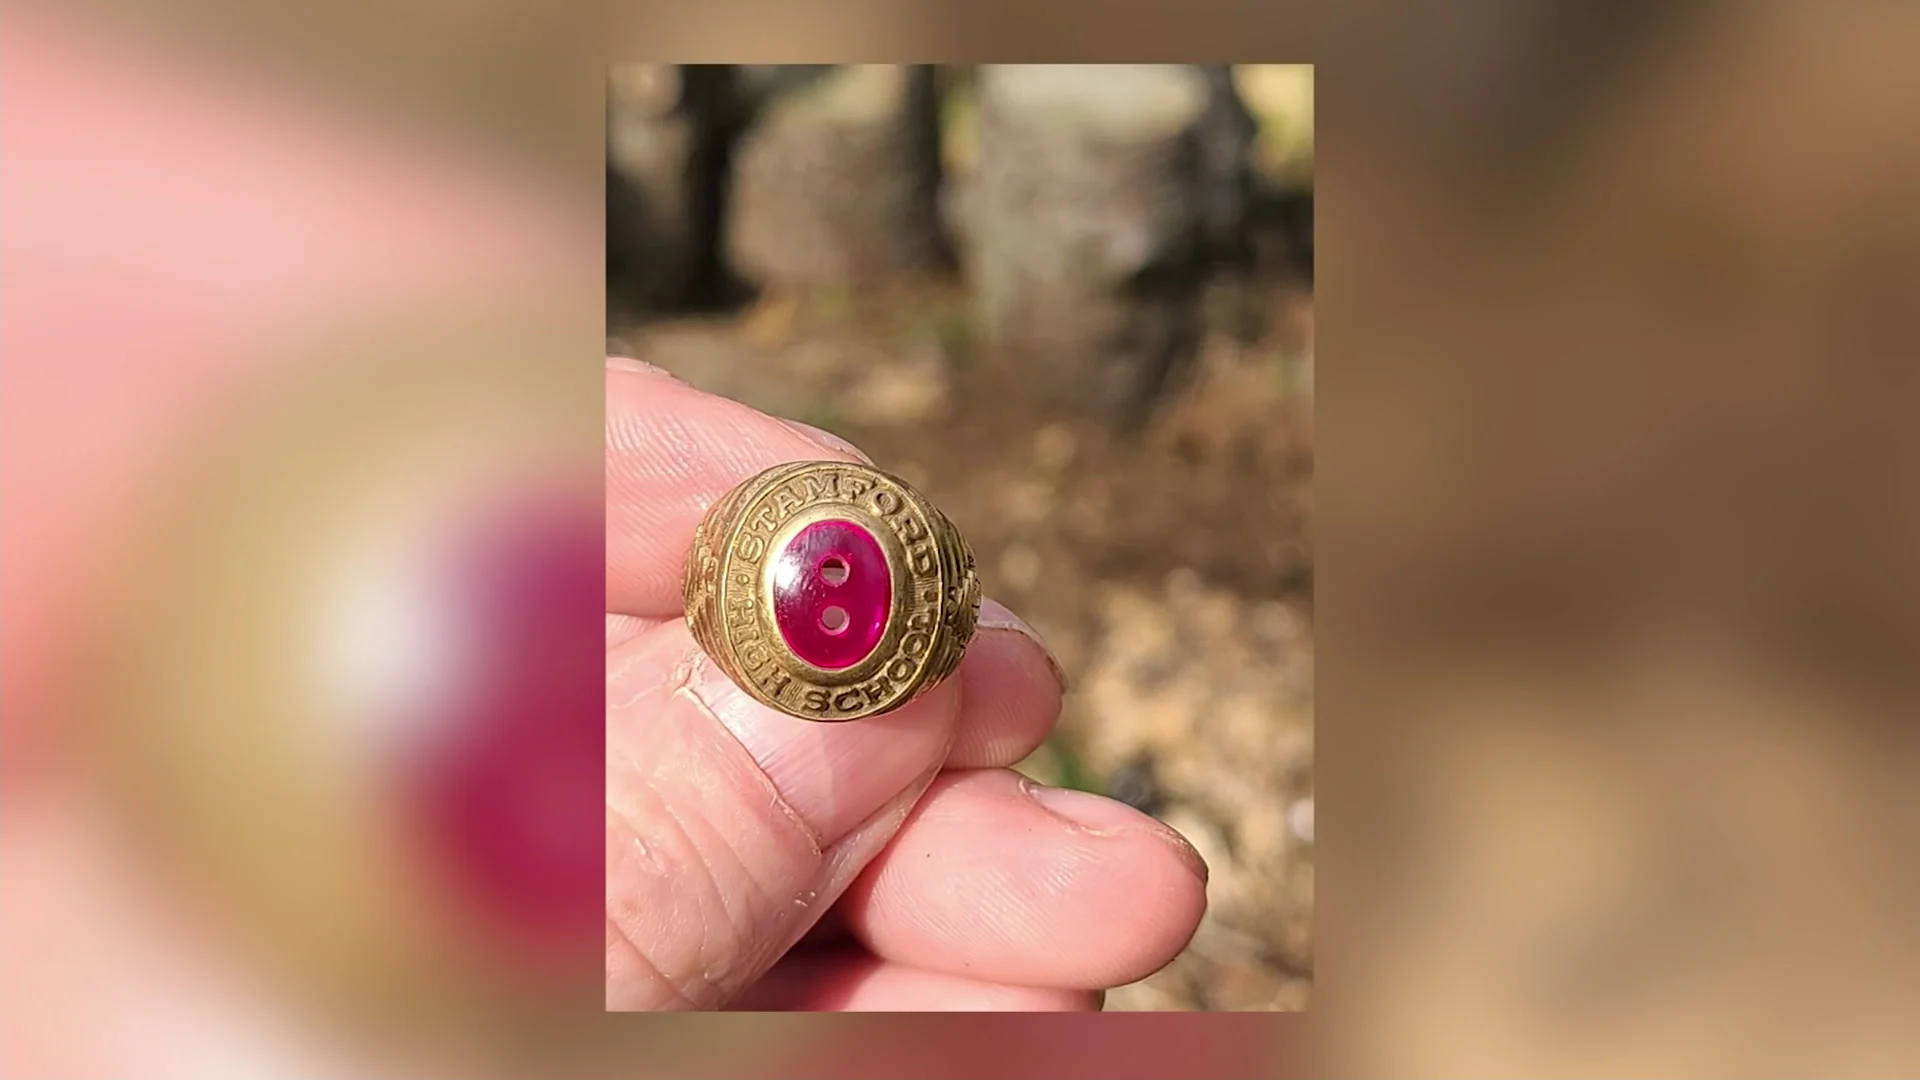 Exclusive: Lost Stamford High School class ring turns up at seminary after almost 80 years